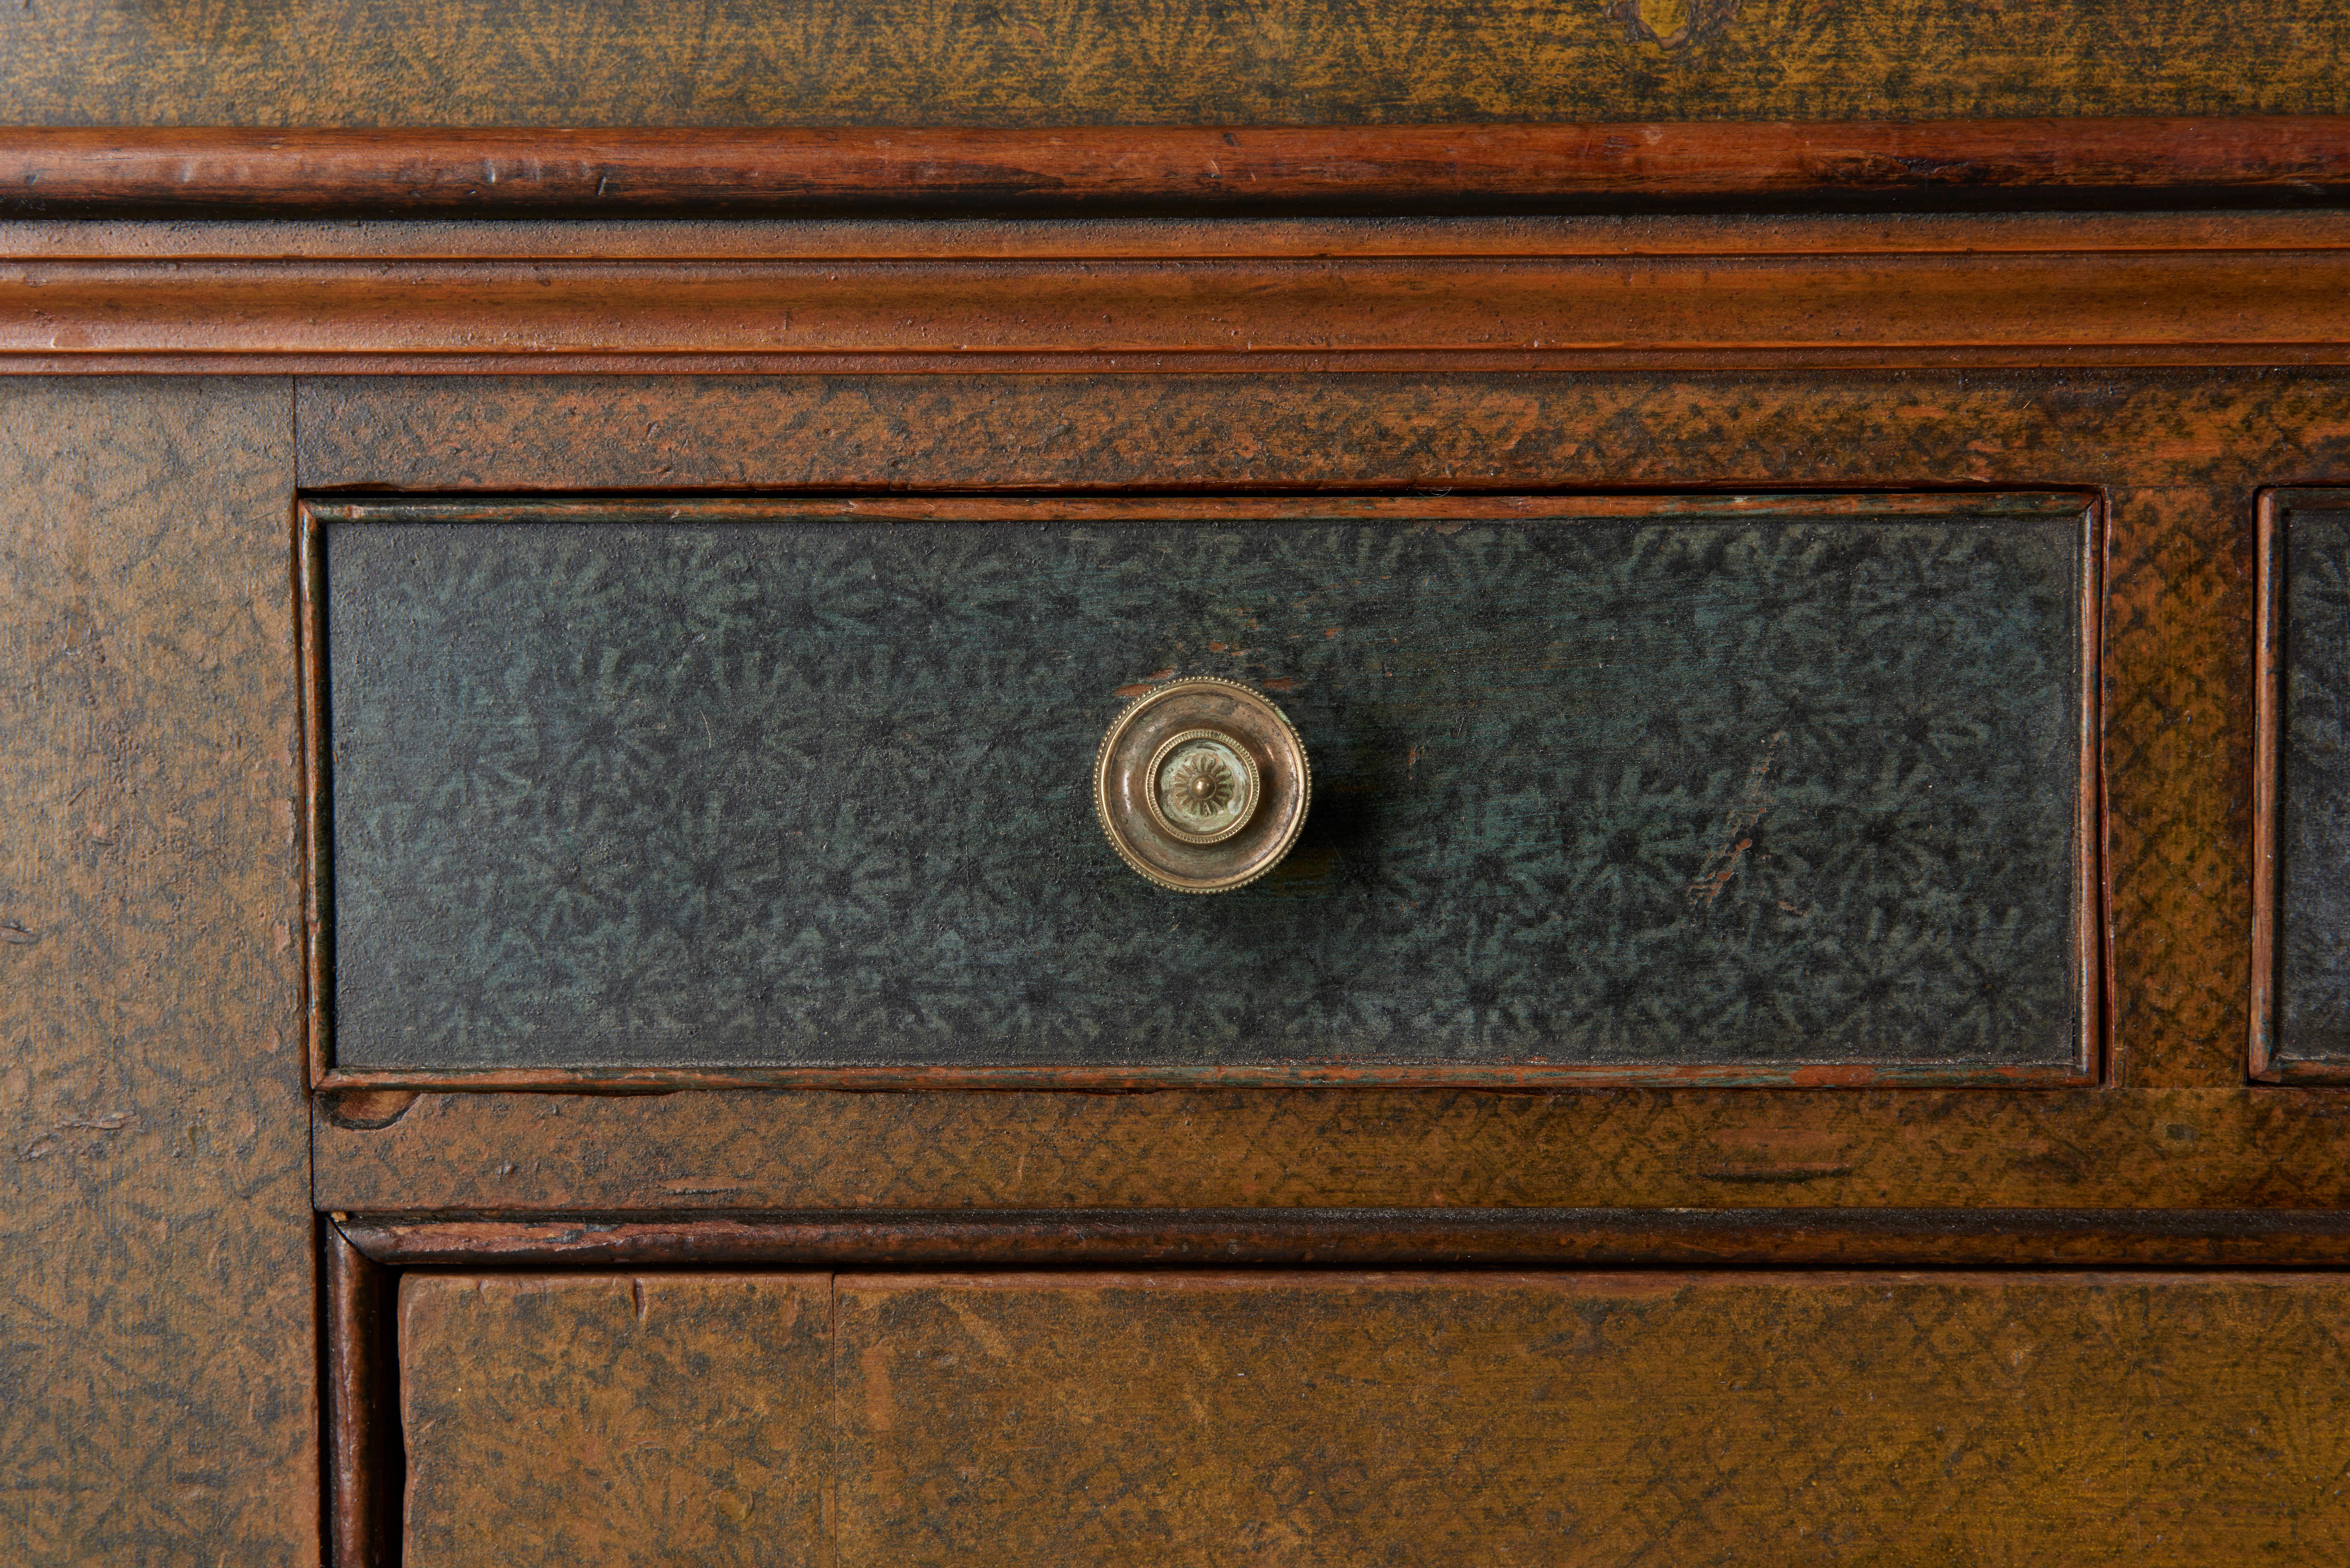 Original paint decoration with unique yellow, blue and white stamped surfaces with a salmon border. Maker's inscription with the date 1832 on the underside of the right drawer. A handsome corner cupboard from Pennsylvania with outstanding decoration